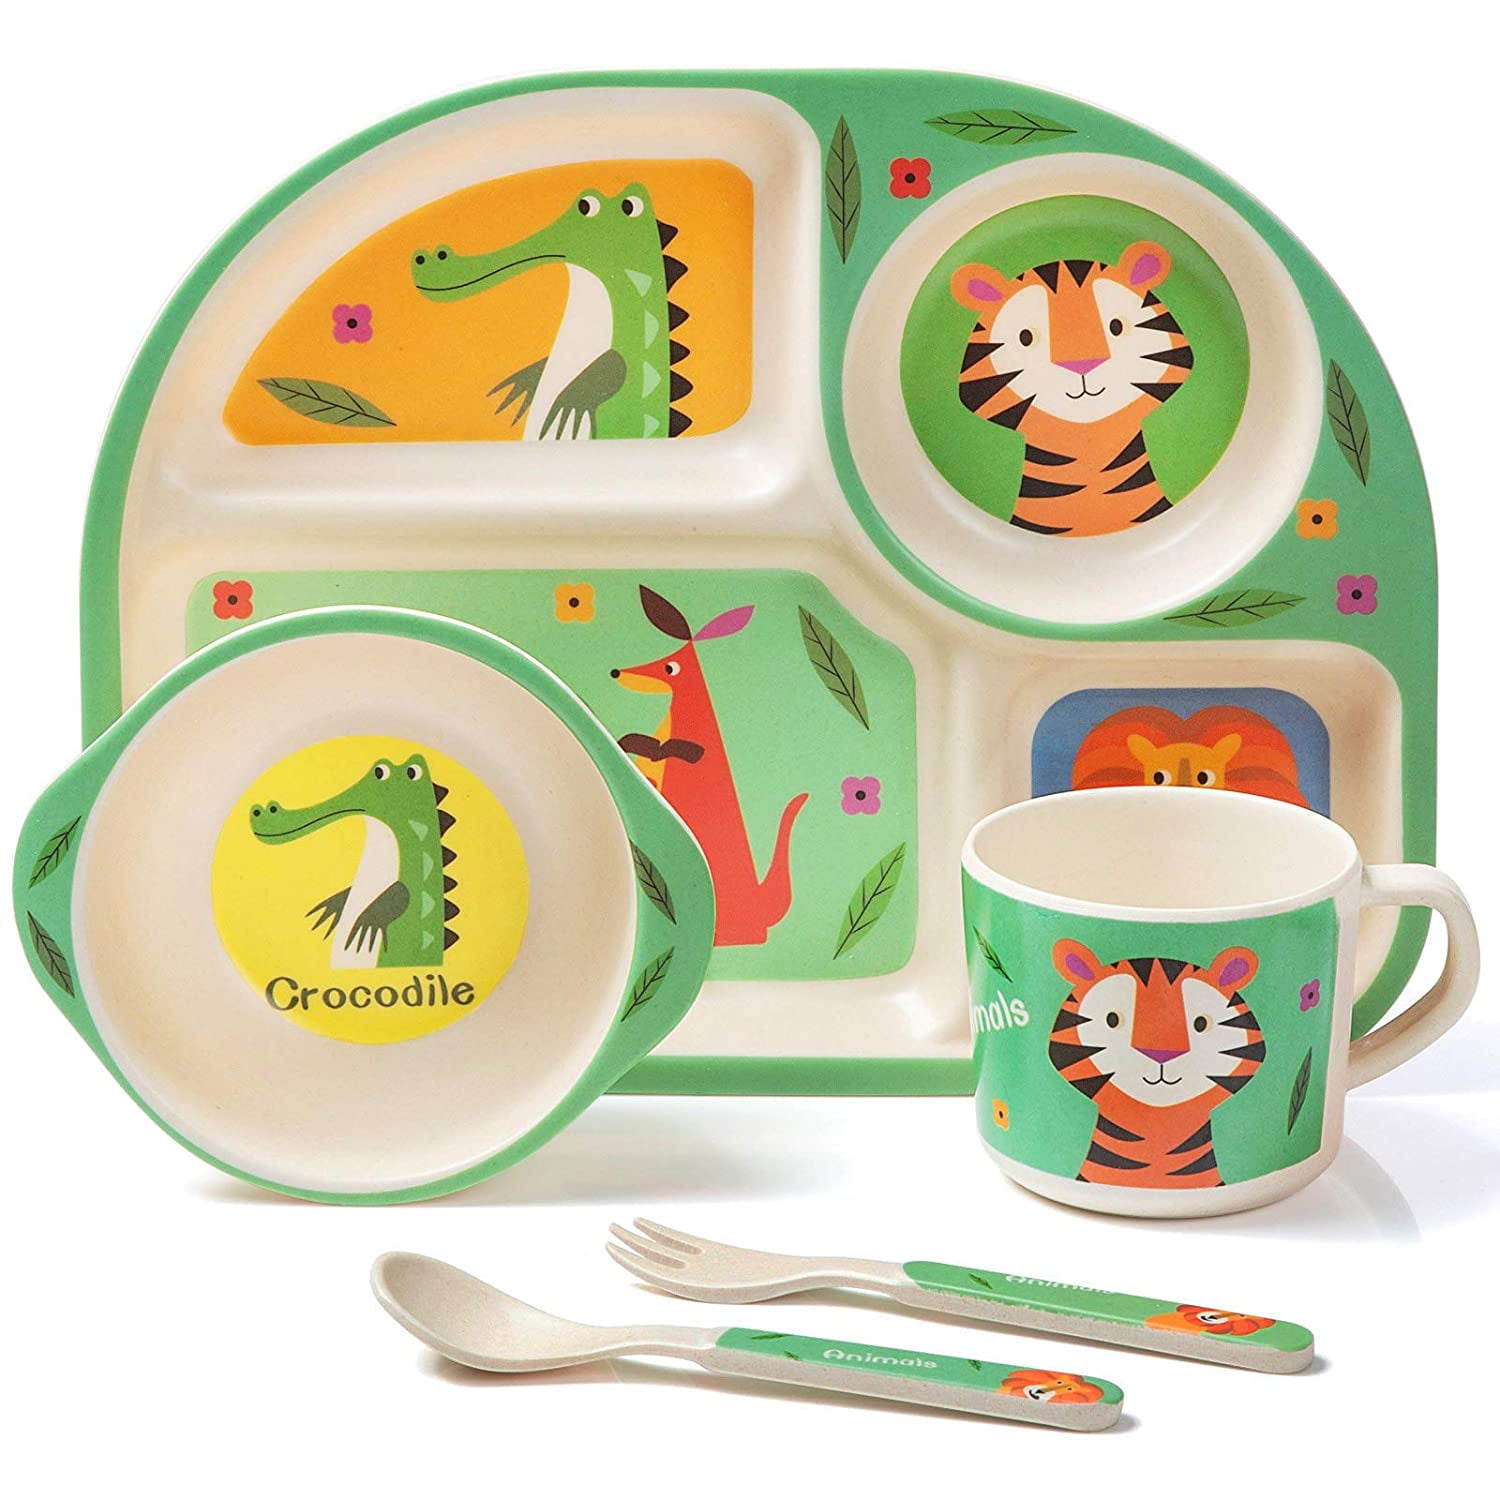 Re-usable 5 Piece Childrens Cutlery Set Tableware Plate Cup Spoon Fork Serving Bowl Tumbler Colourful Cartoon Animal Design Gabz Bamboo Kids Dinner Set 